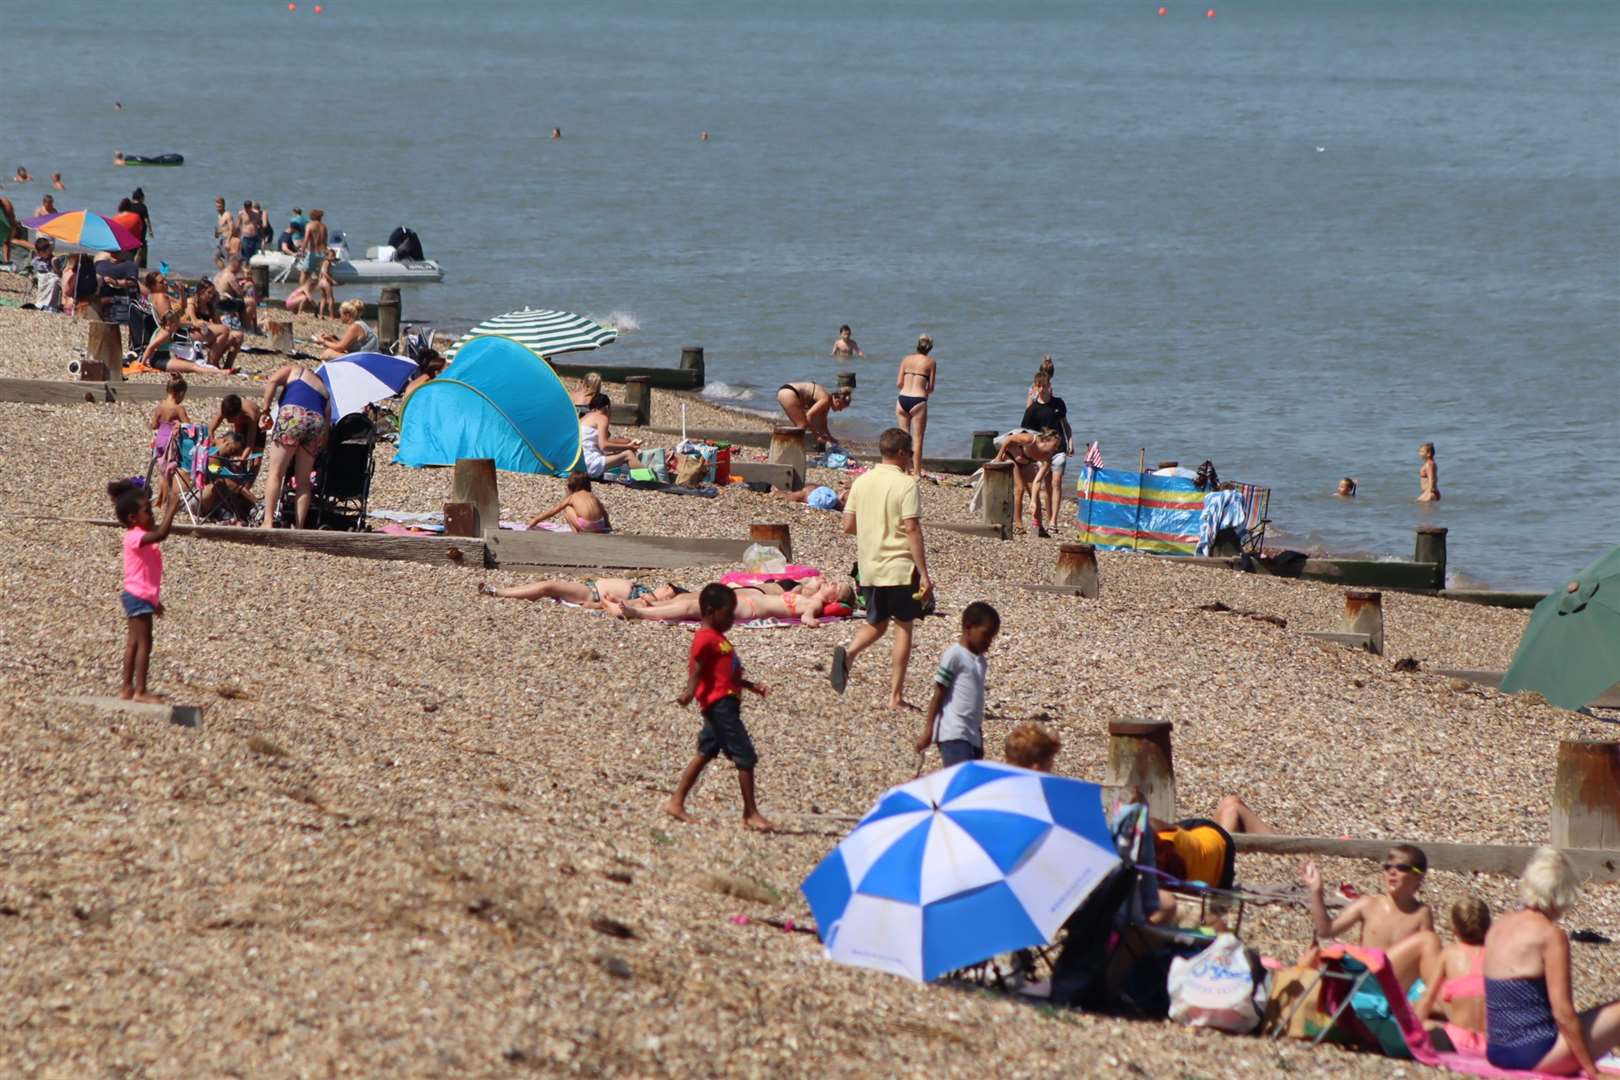 A level 3 heat-health warning has been issued